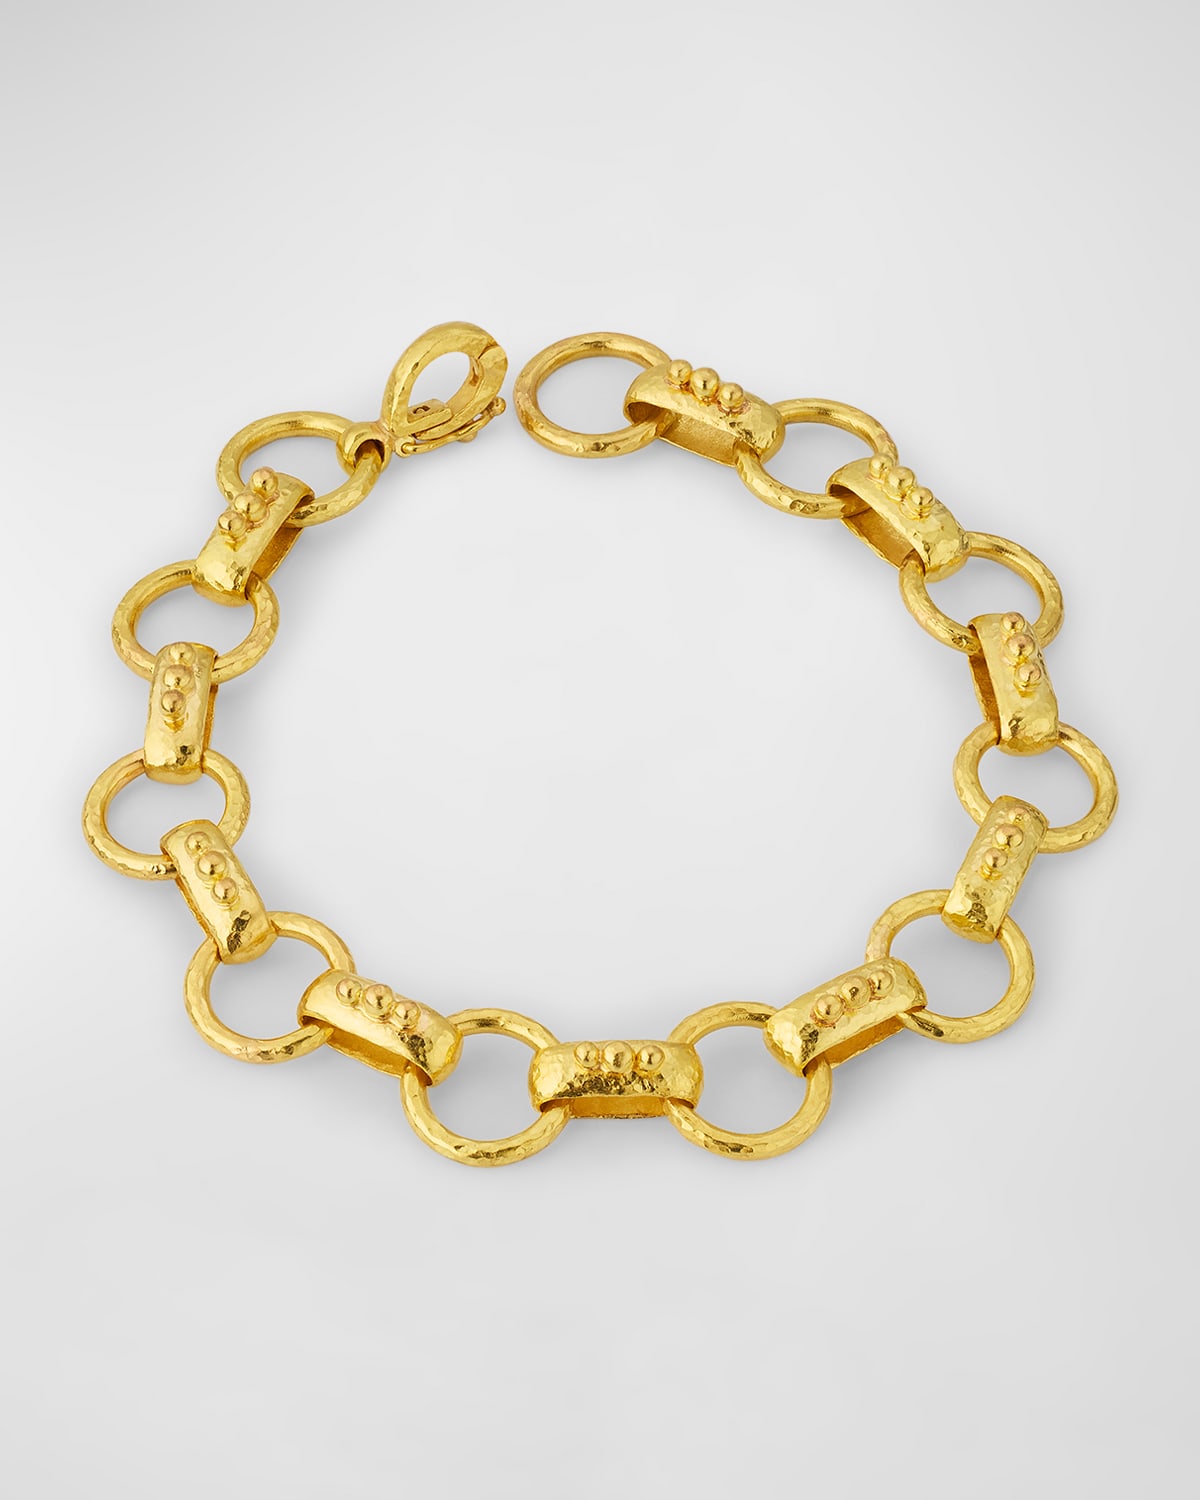 19K Yellow Gold Torcello Link Bracelet with Circle Clasp